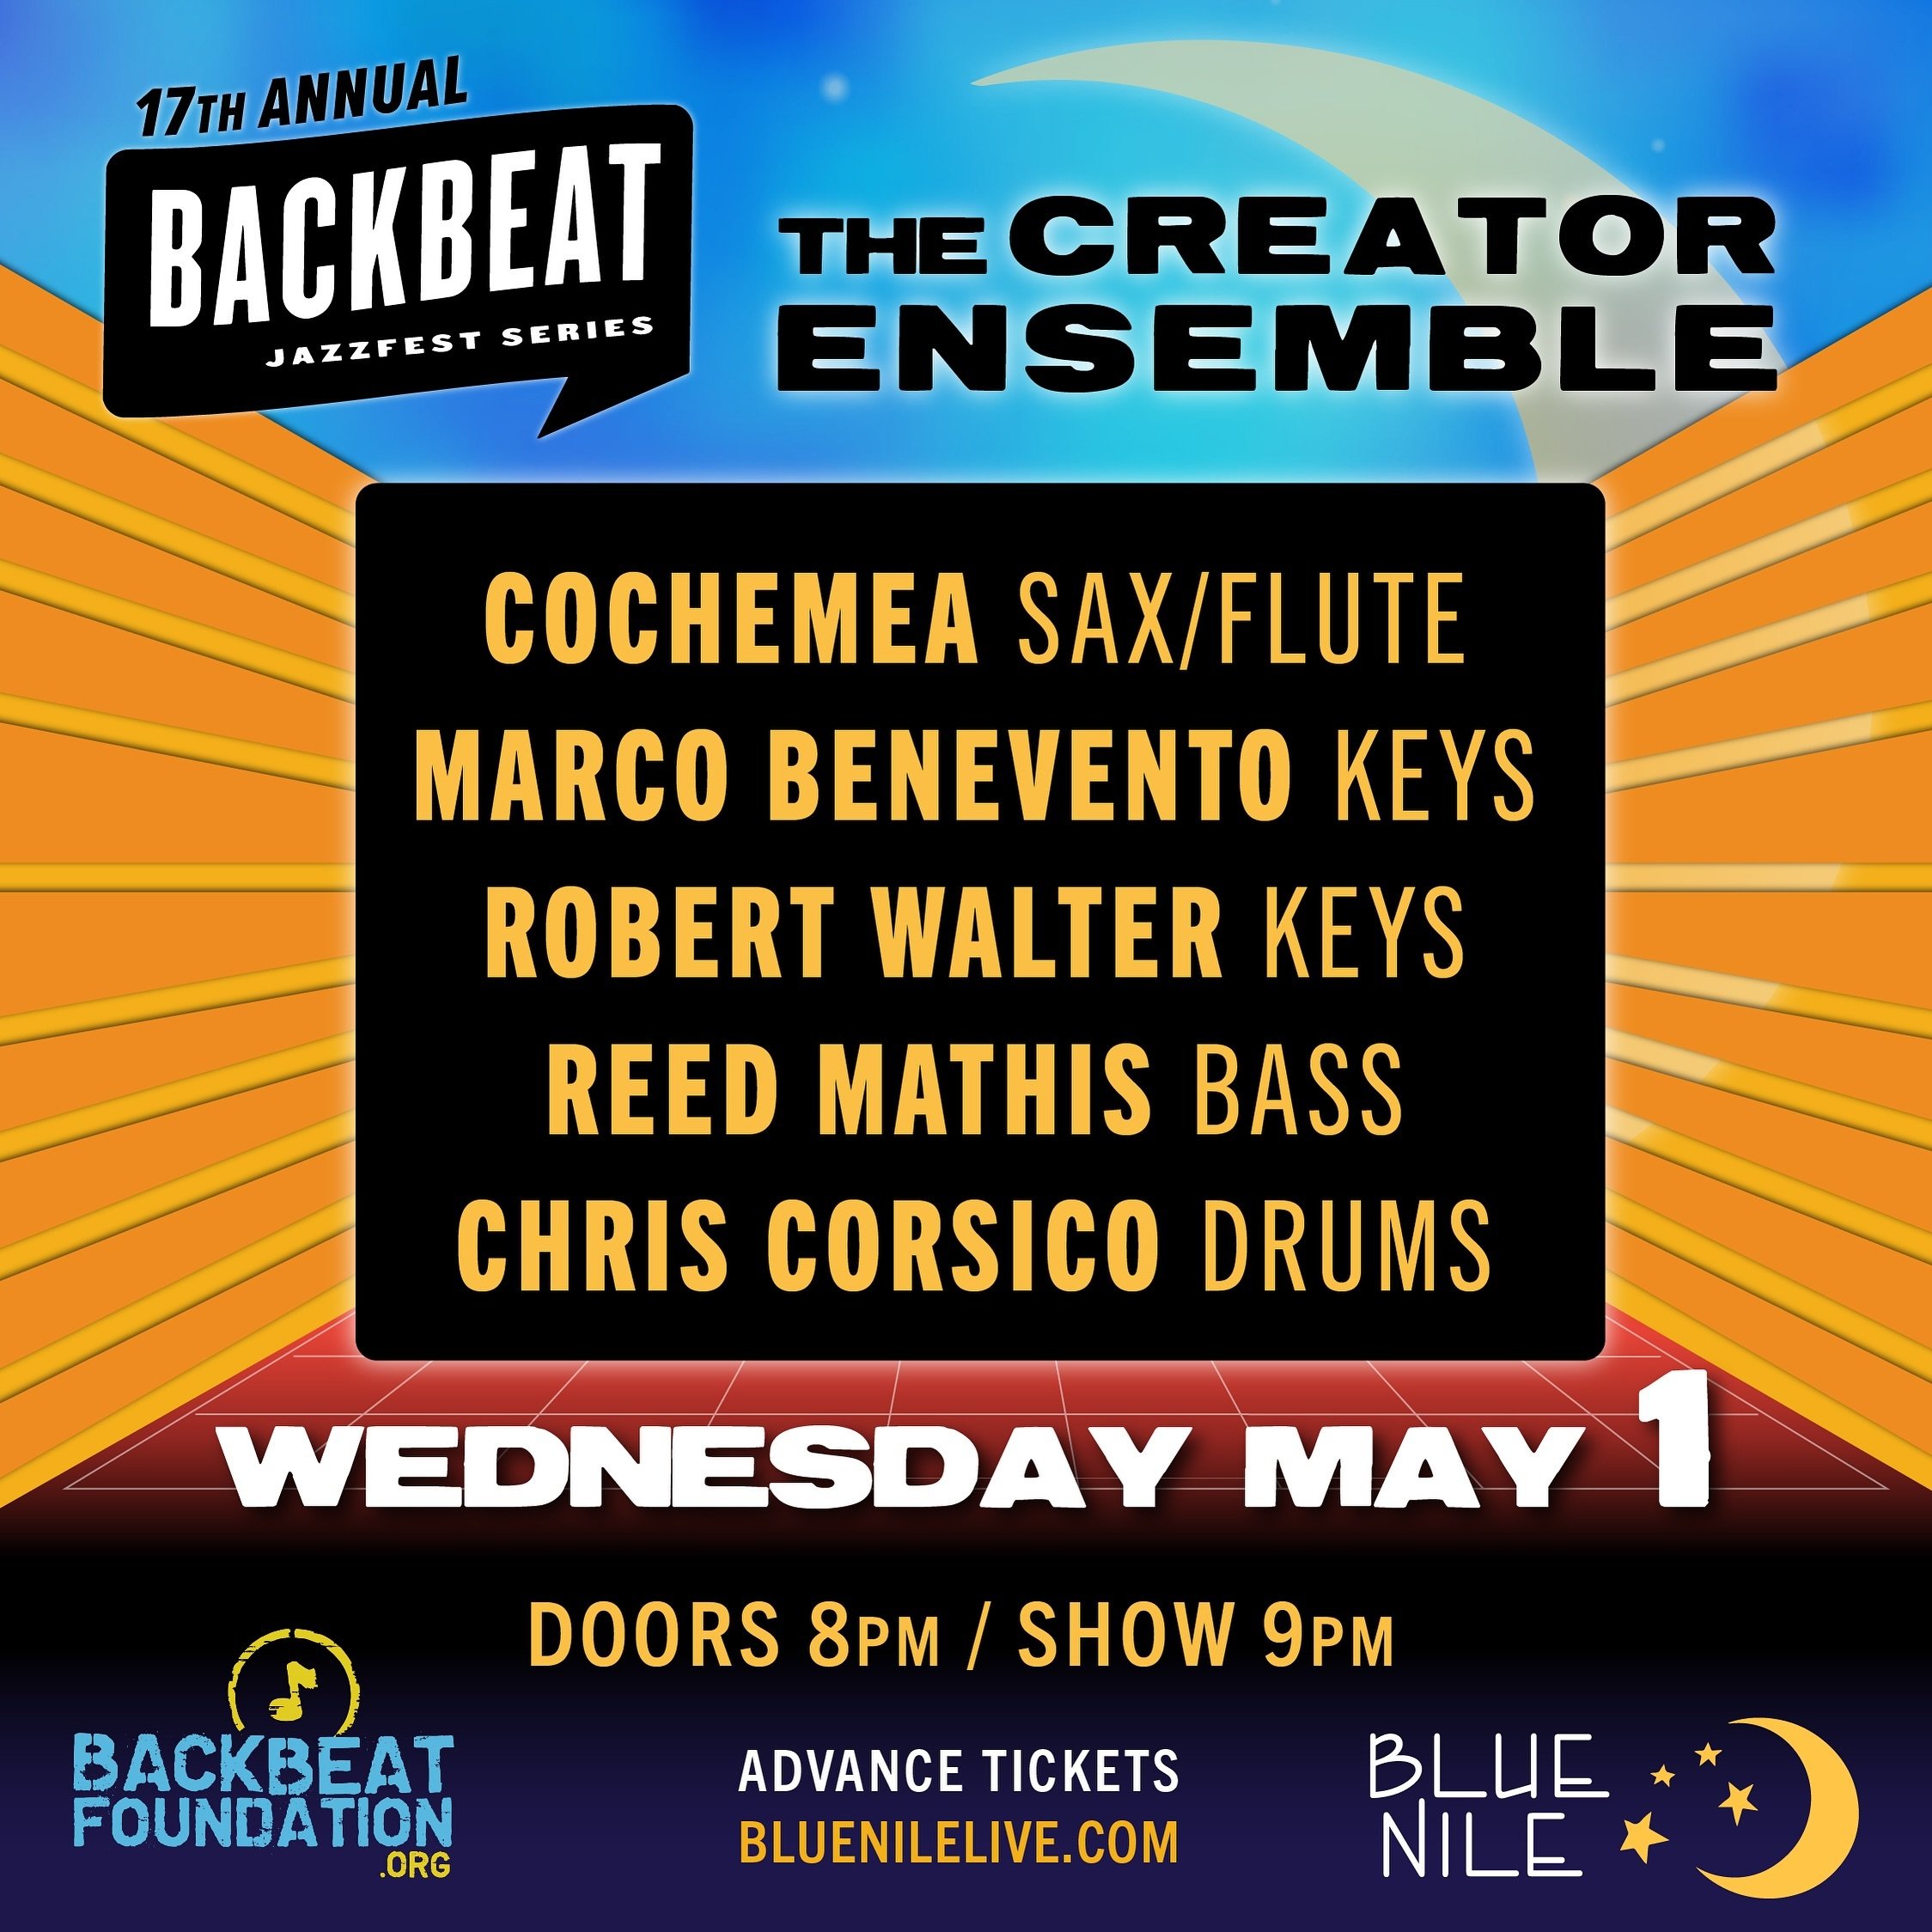 TONIGHT!! 
The Creator Ensemble 9PM
Game of Bones 11PM
17th Annual Backbeat JazzFest Series PLAYS ON!
✨🌙 Advance Tickets bluenilelive.com

New Breed Brass Band BALCONY PARTY 9:30PM in the&nbsp;&nbsp;Blue Nile Balcony Room (UPSTAIRS)

@backbeatfounda